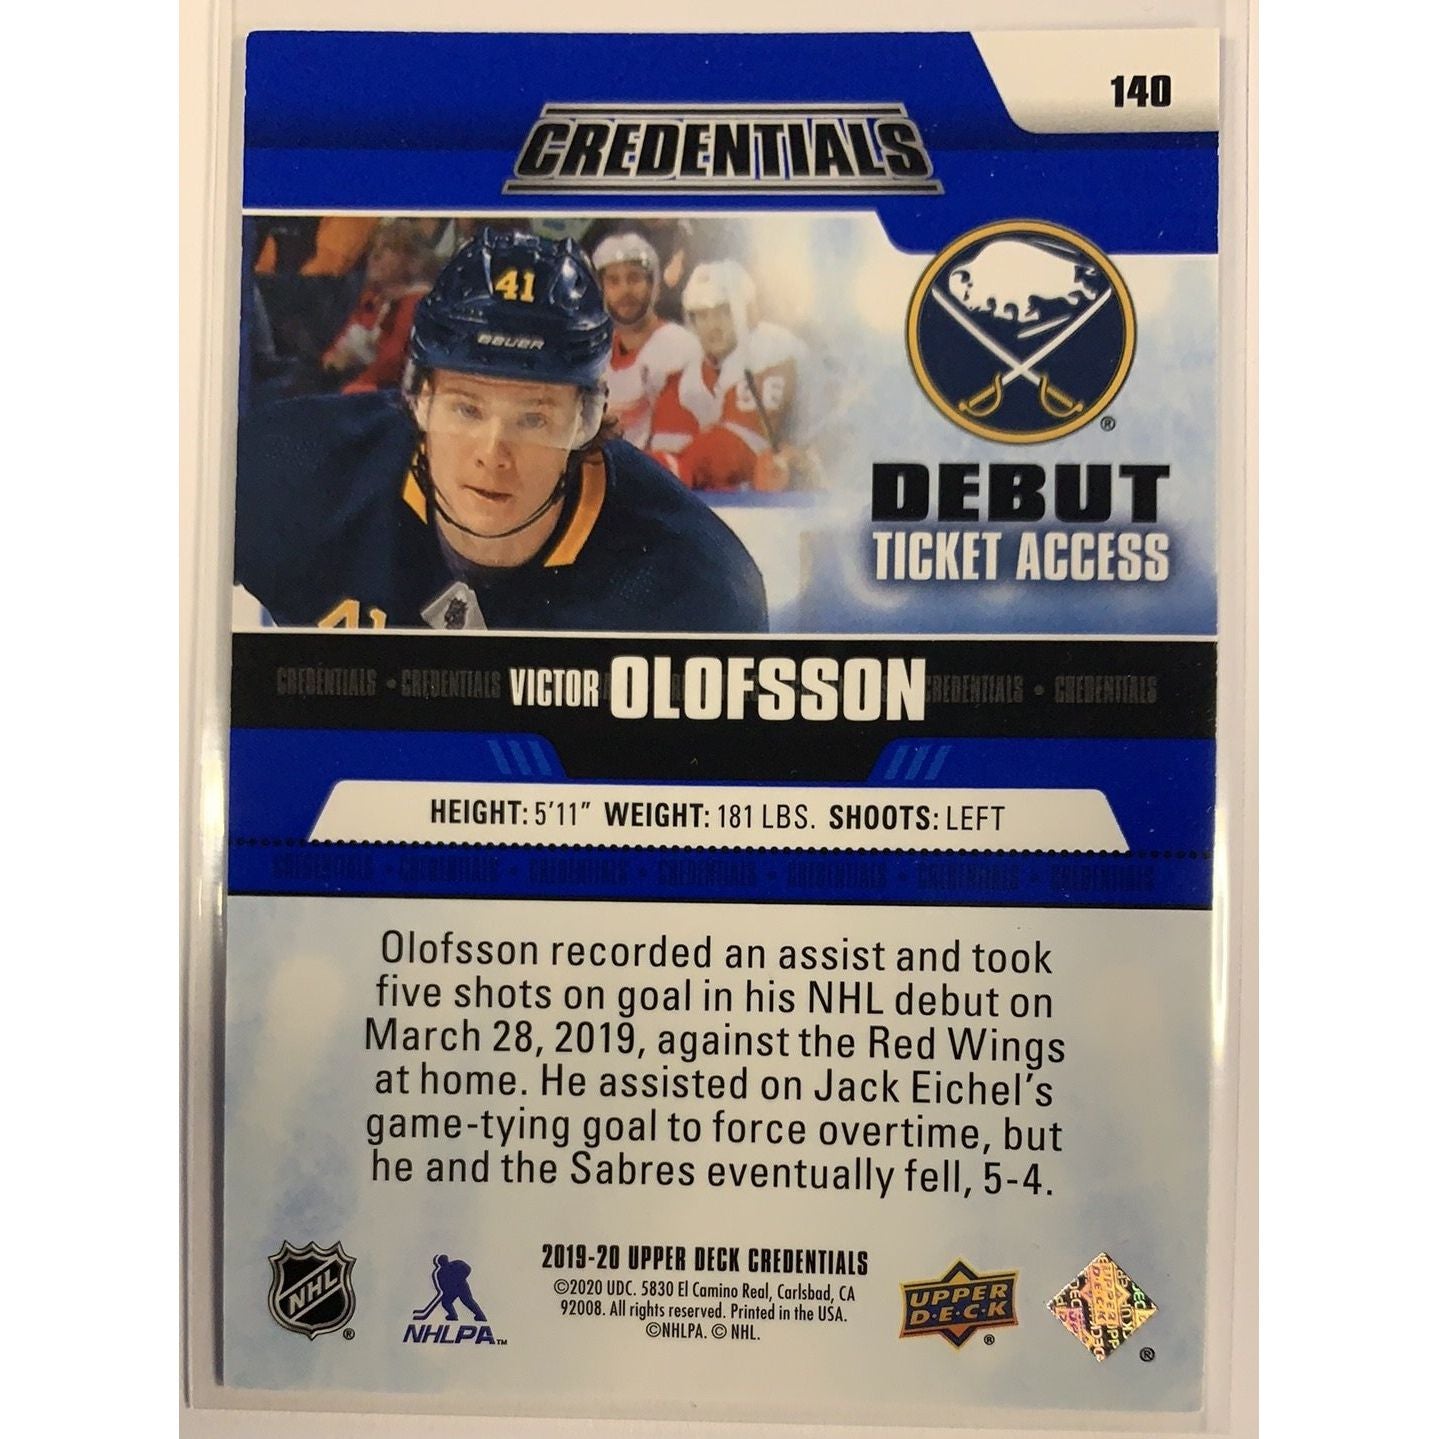  2019-20 Credentials Victor Olofsson Debut Ticket Access /499  Local Legends Cards & Collectibles